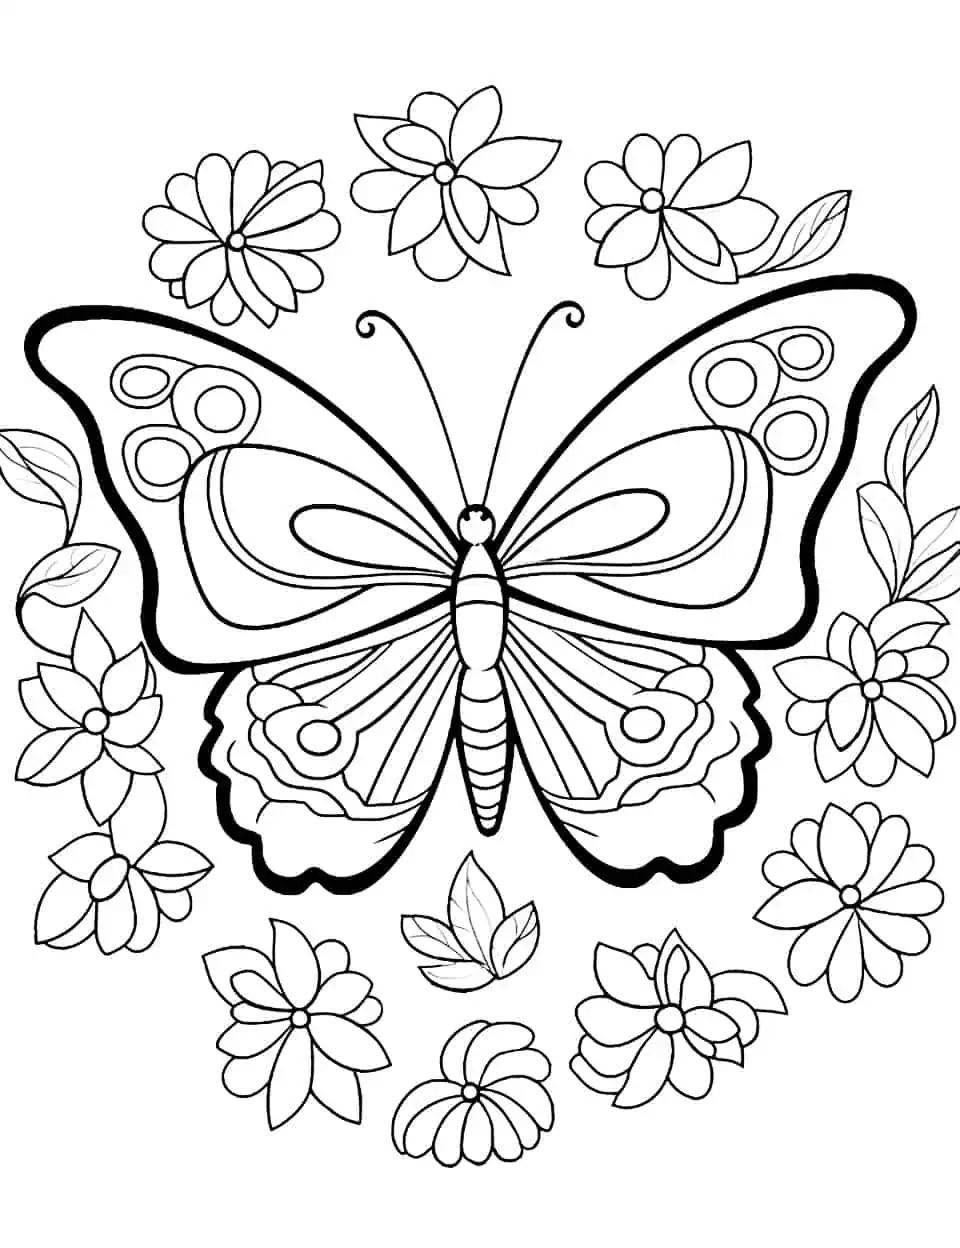 Kindergarten Kaleidoscope Butterfly Coloring Page - A vibrant coloring page featuring a collection of adorable butterflies and flowers.